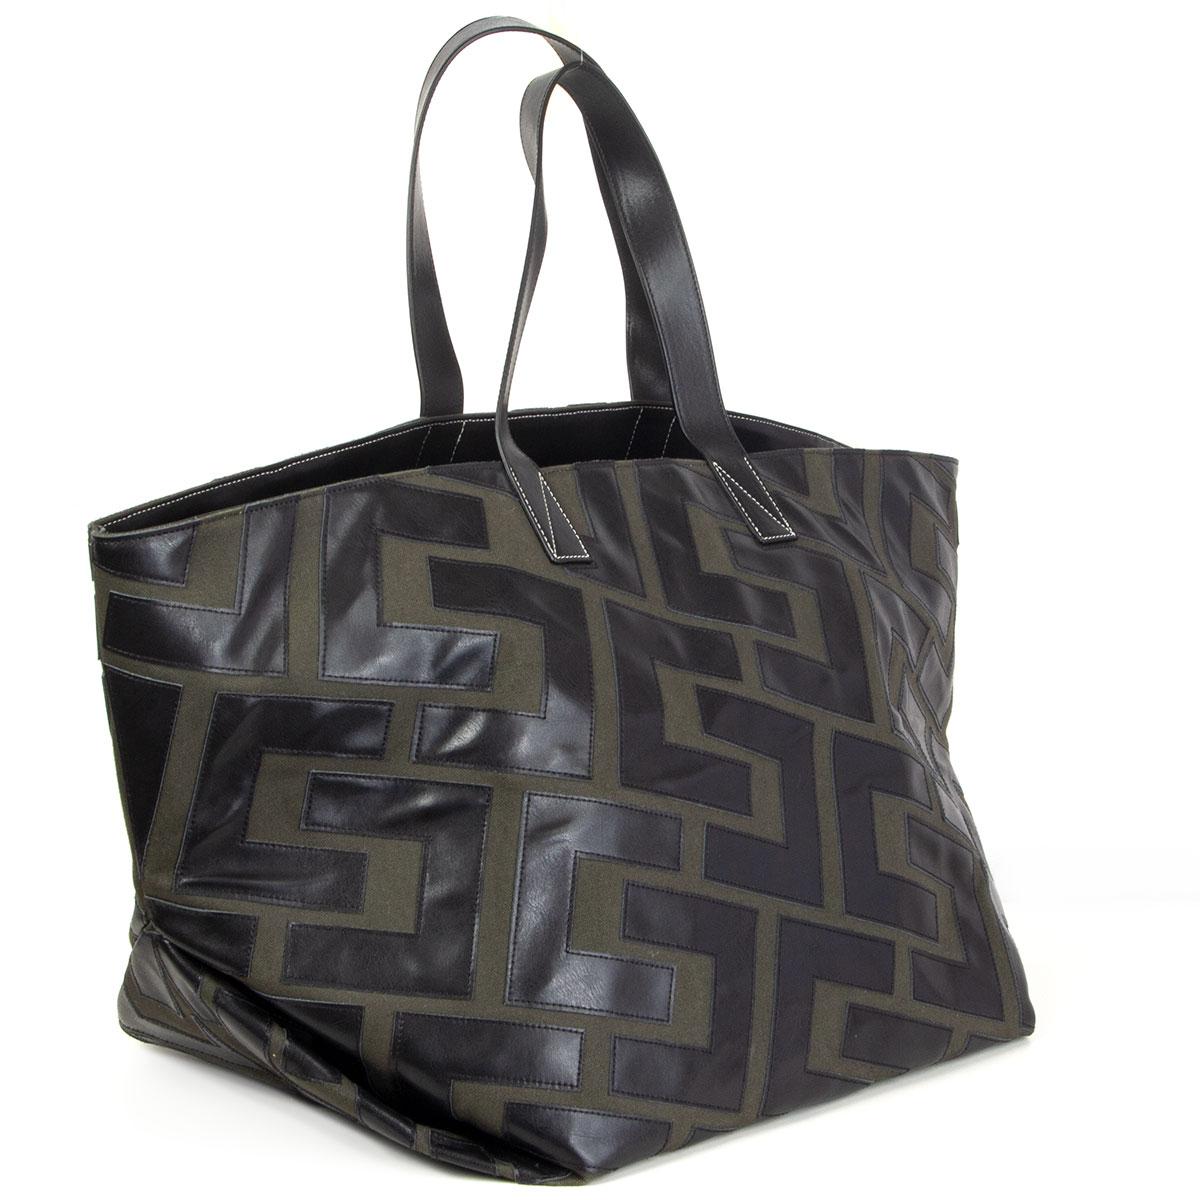 Céline by Phoebe Philo patchwork bicolor tote bag in dark olive green canvas and black calfskin. Lined in dark olive canvas featuring black detachable calfskin pouch/clutch. Has been carried and is in excellent condition. Comes with dust bag.